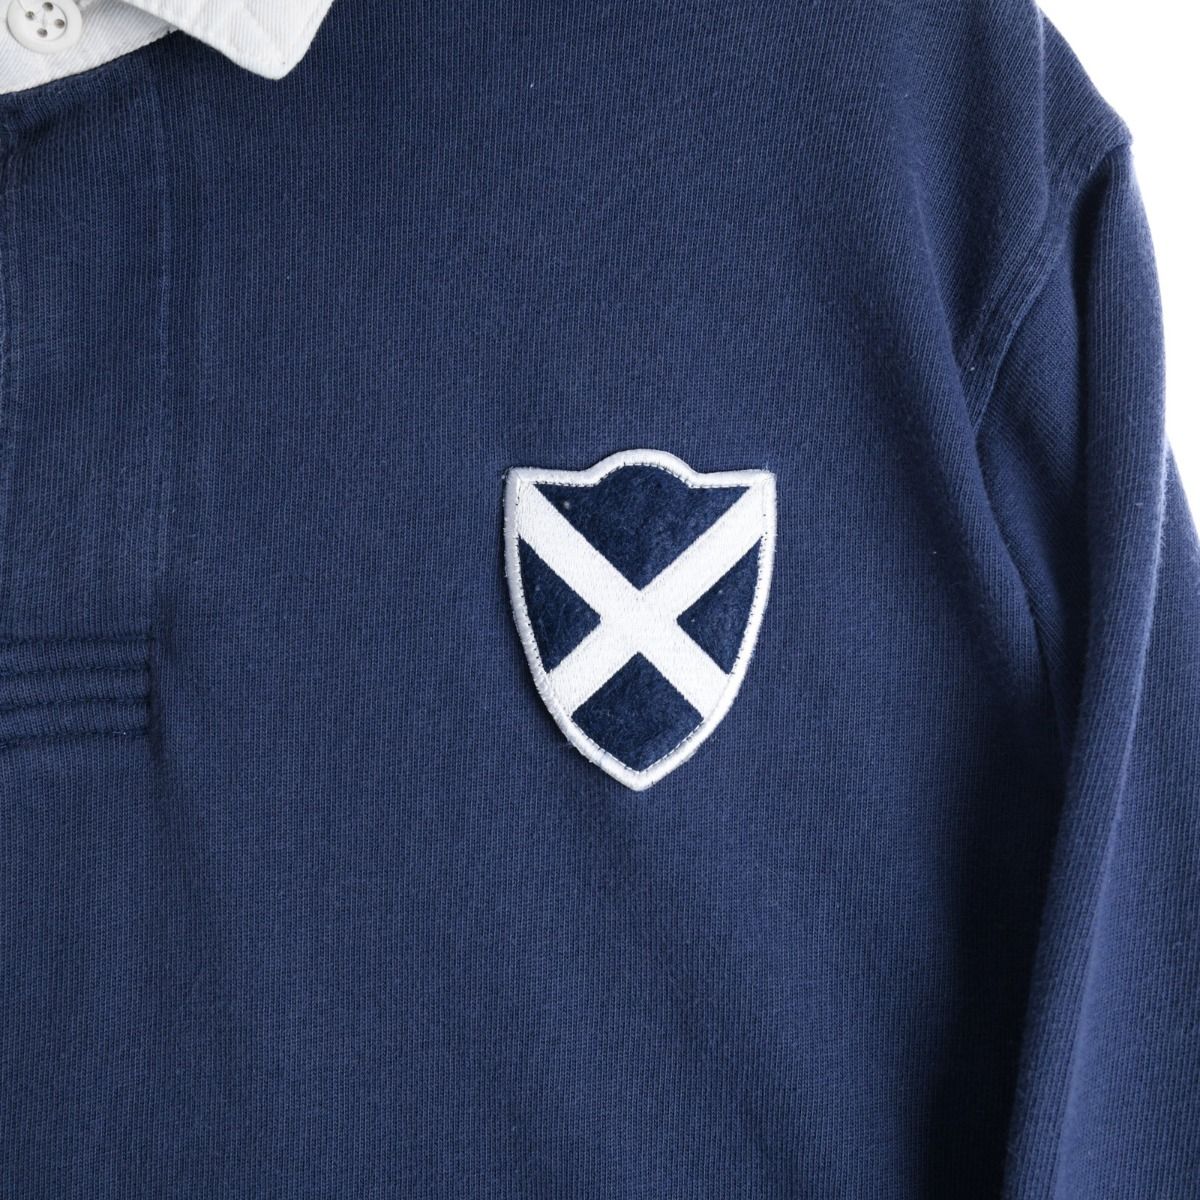 Nike X Scotland Early 2000s Rugby Shirt